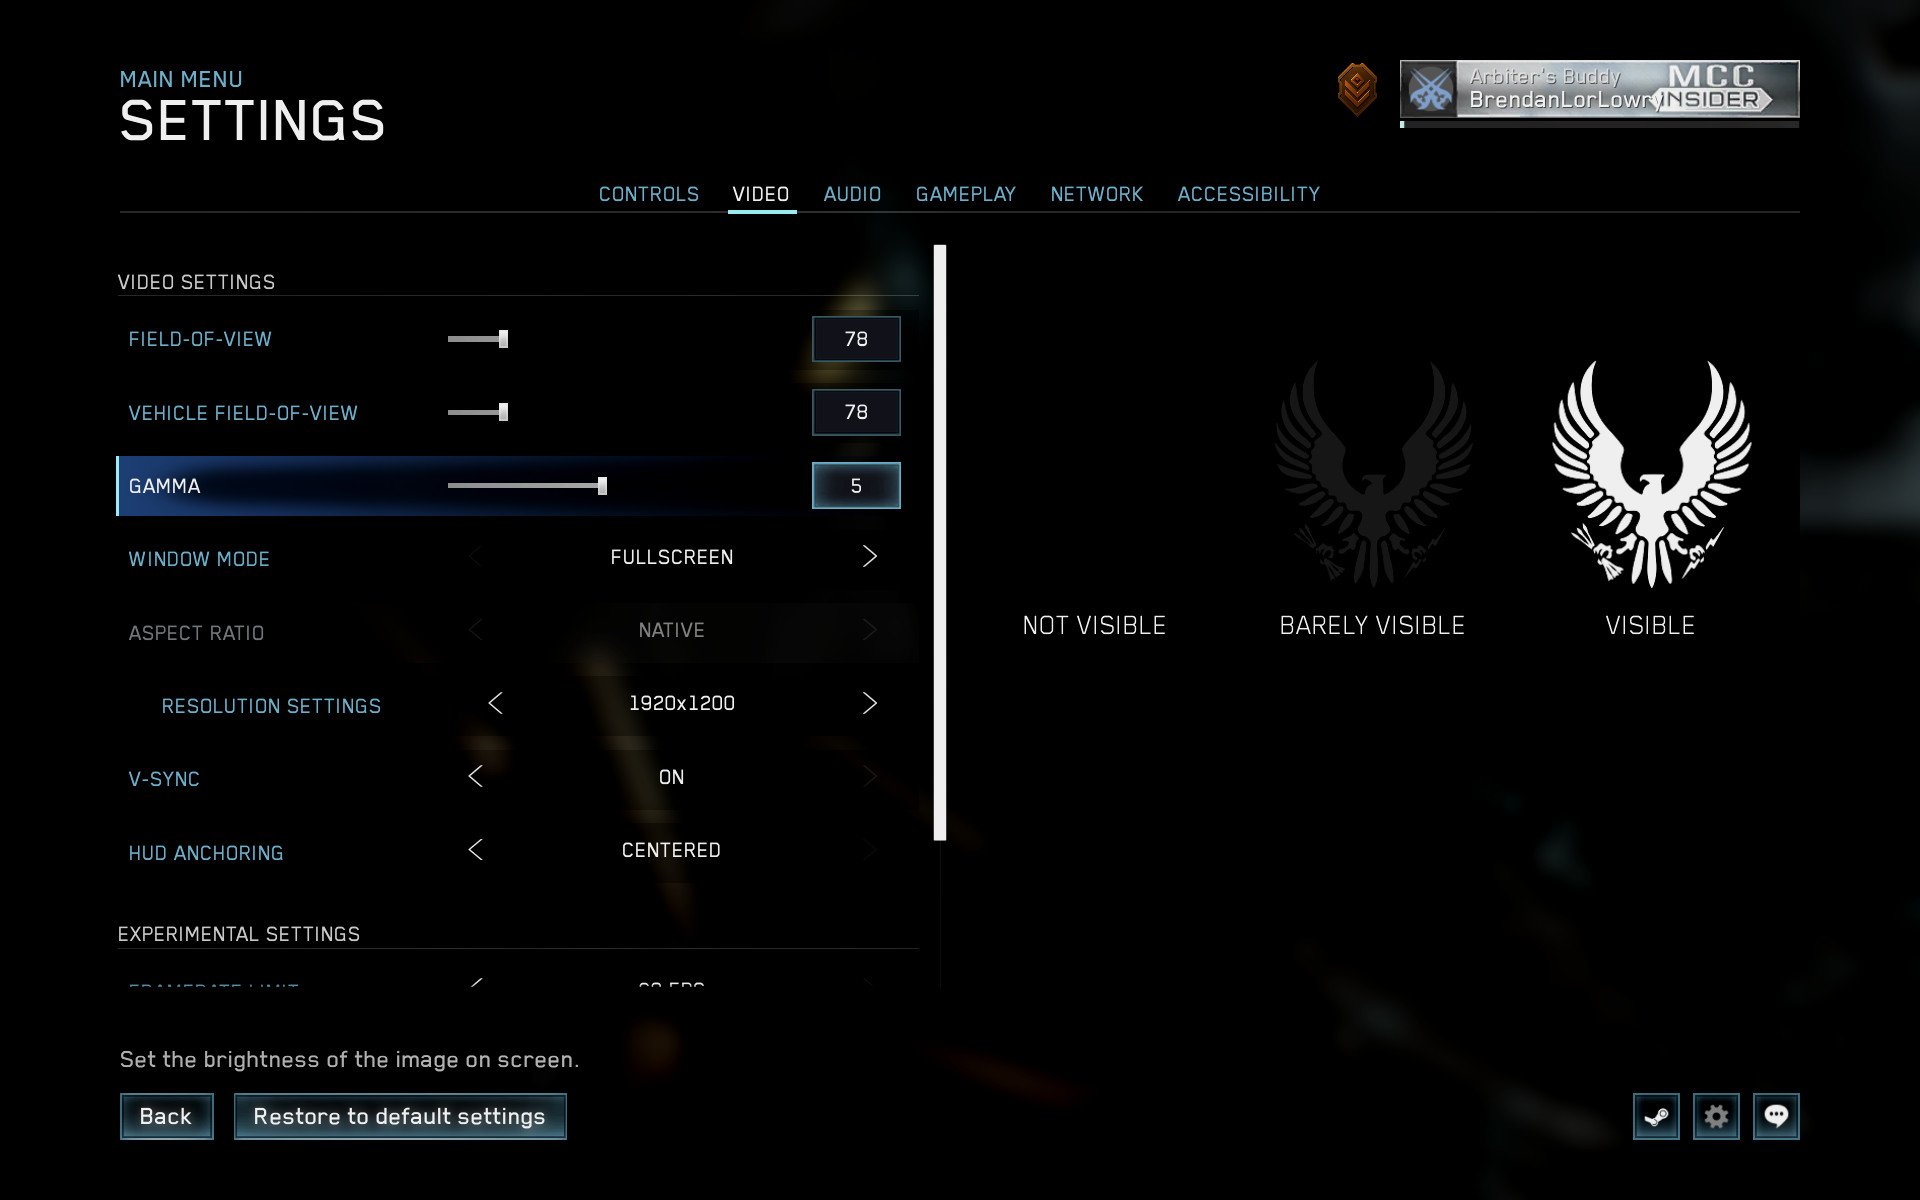 The UI in Halo: Reach on PC.